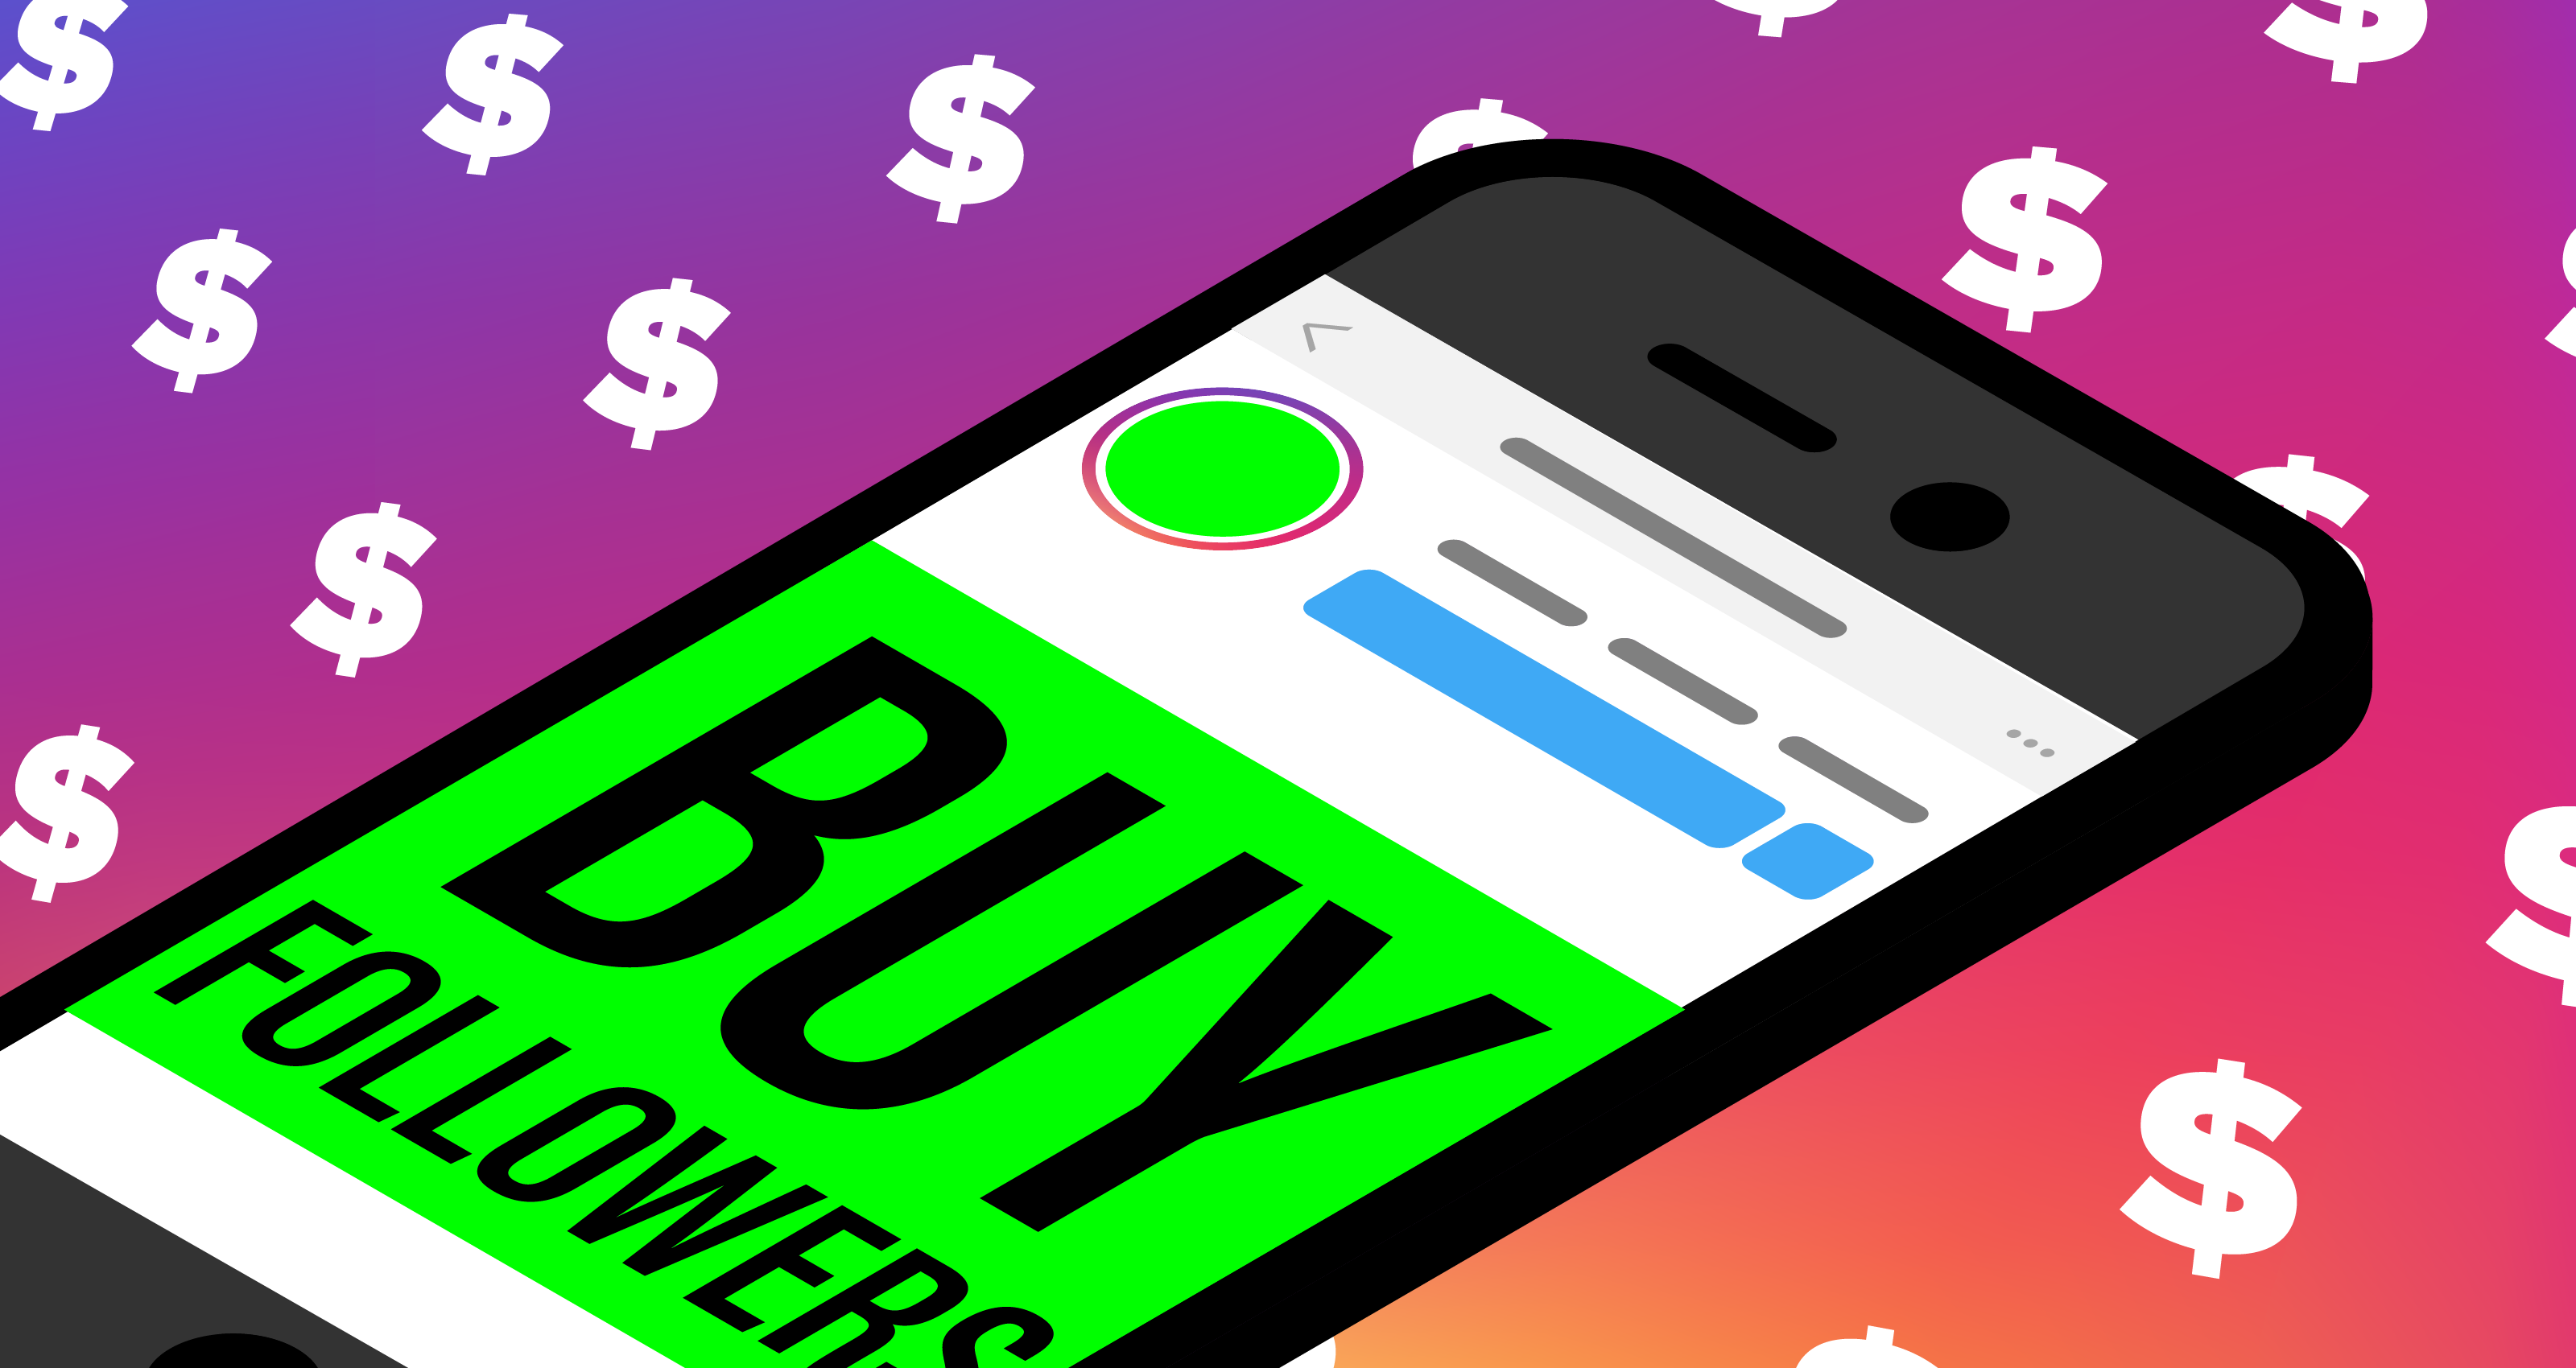 Instagram Caught Selling Ads To Follower Buying Services It Banned